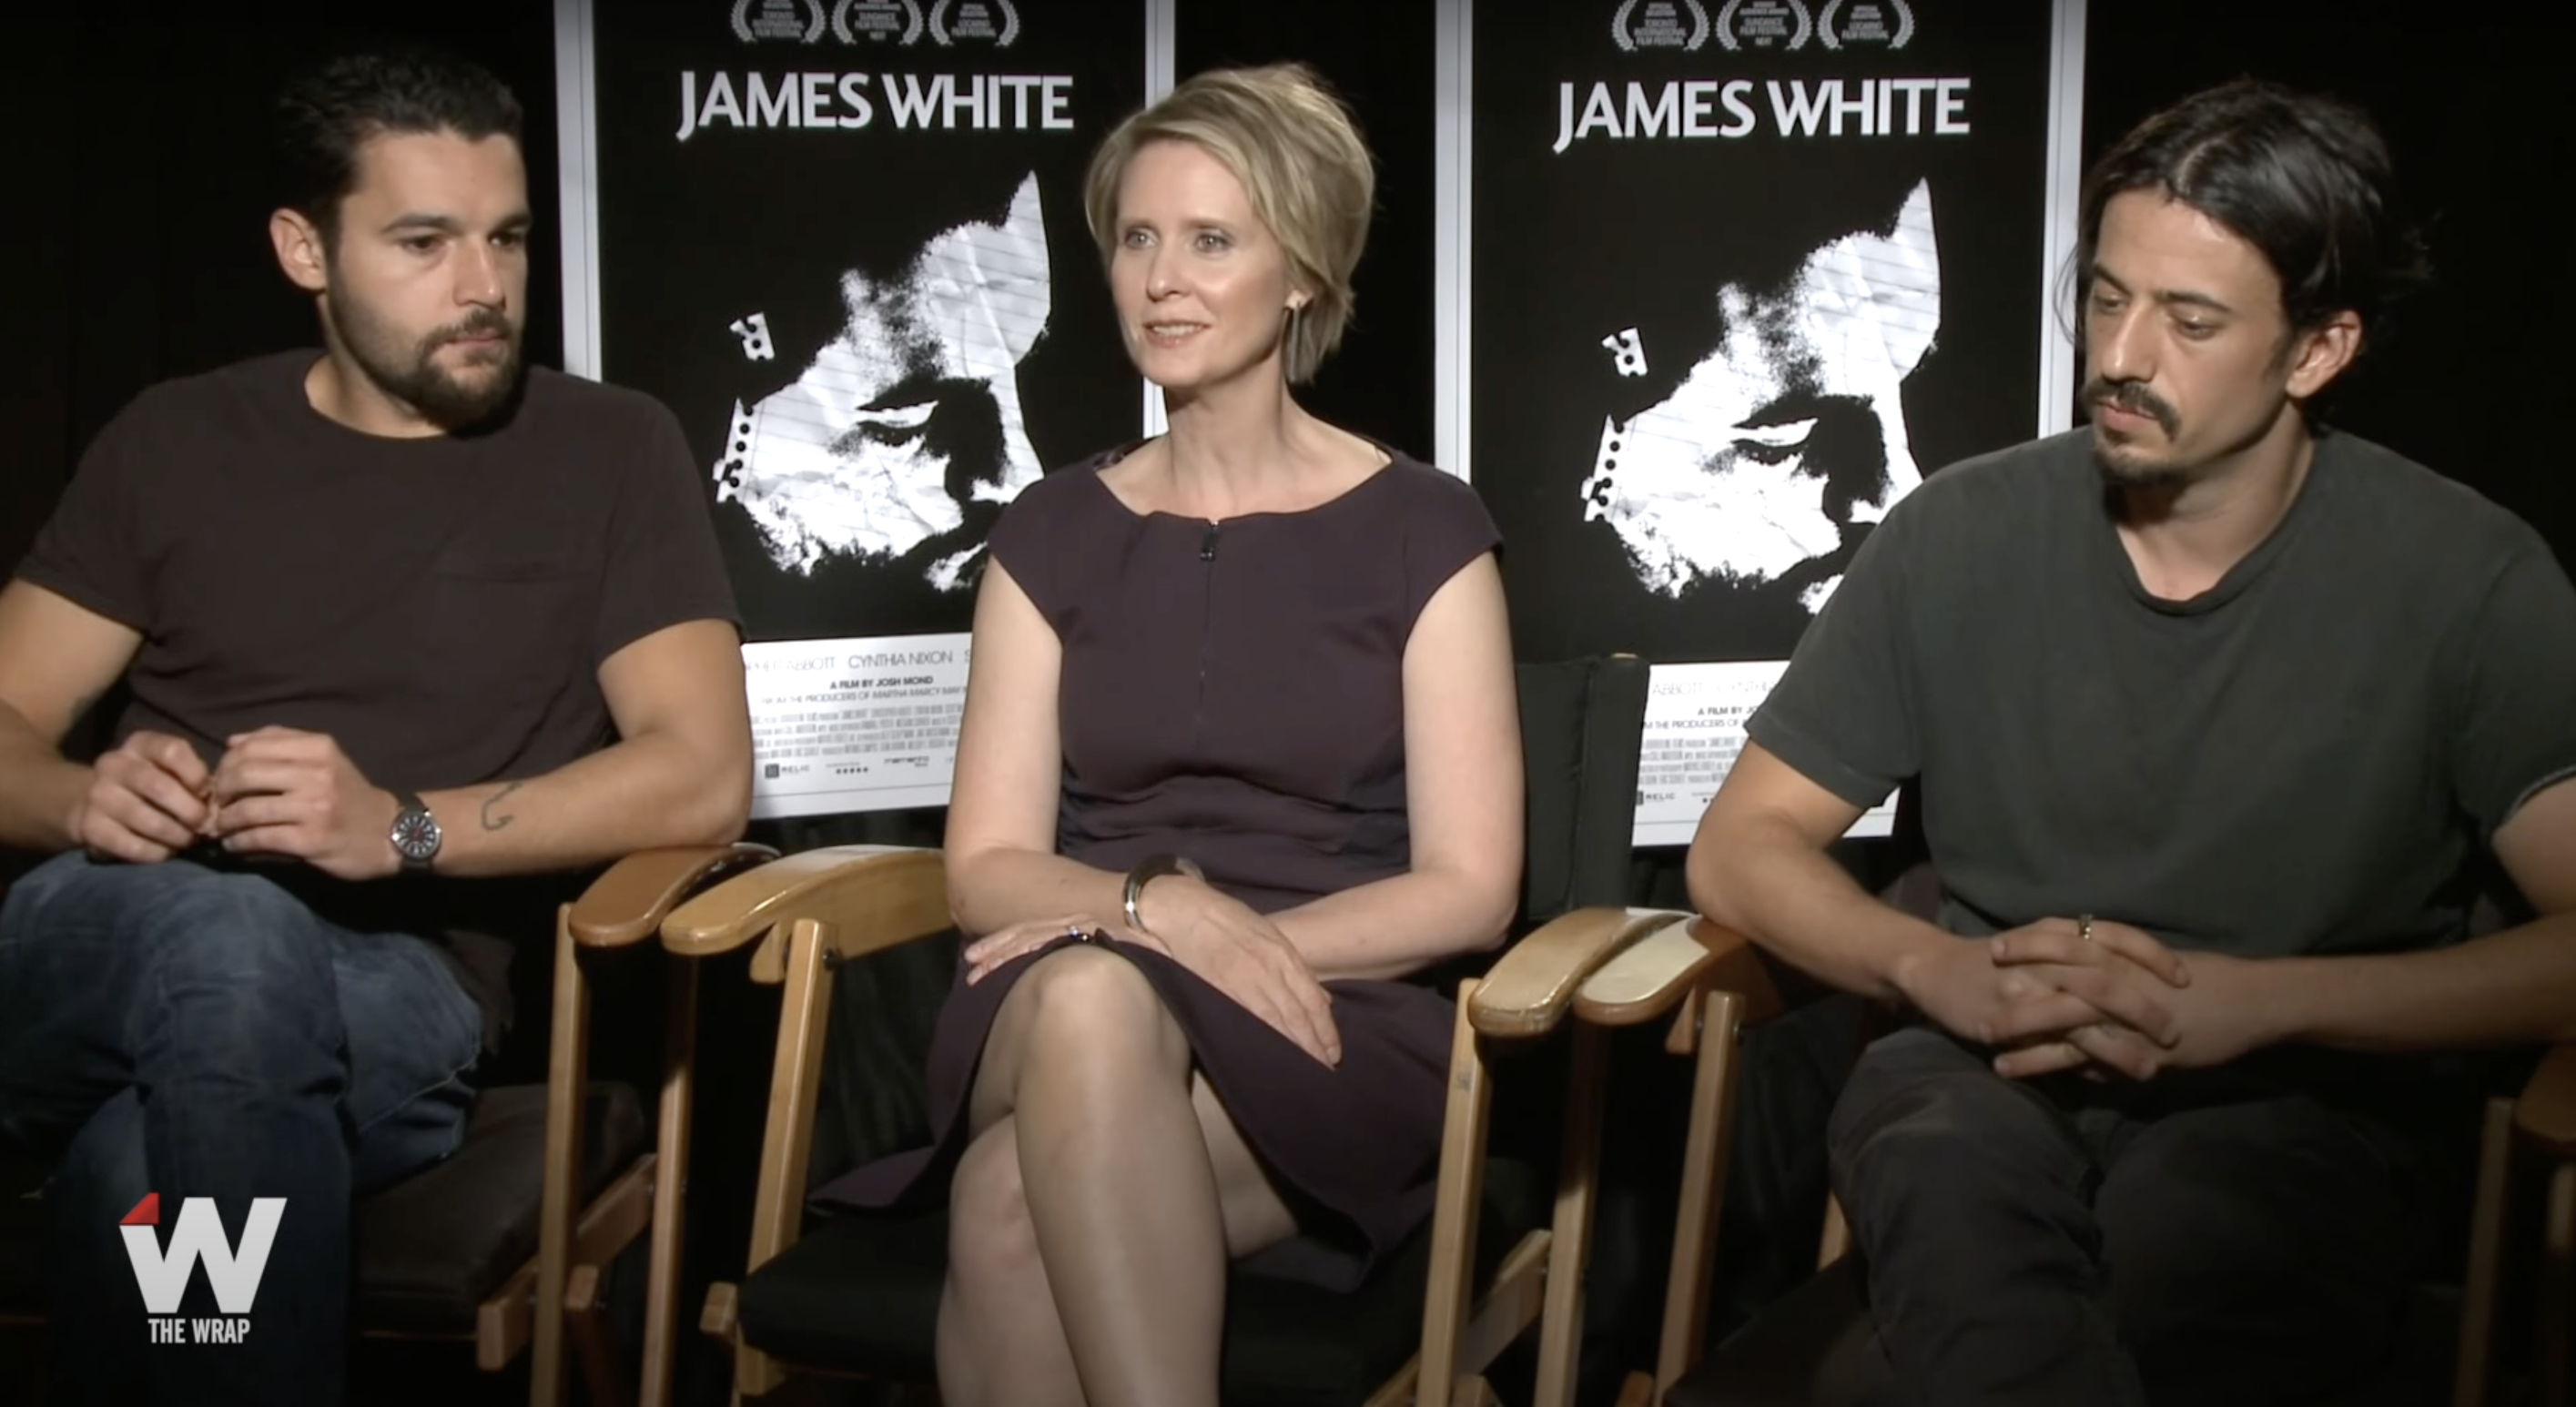 Christopher Abbott, Cynthia Nixon, and Josh Mond discuss their journey of working on "James White," as seen in a video dated November 10, 2015 | Source: YouTube/thewrap